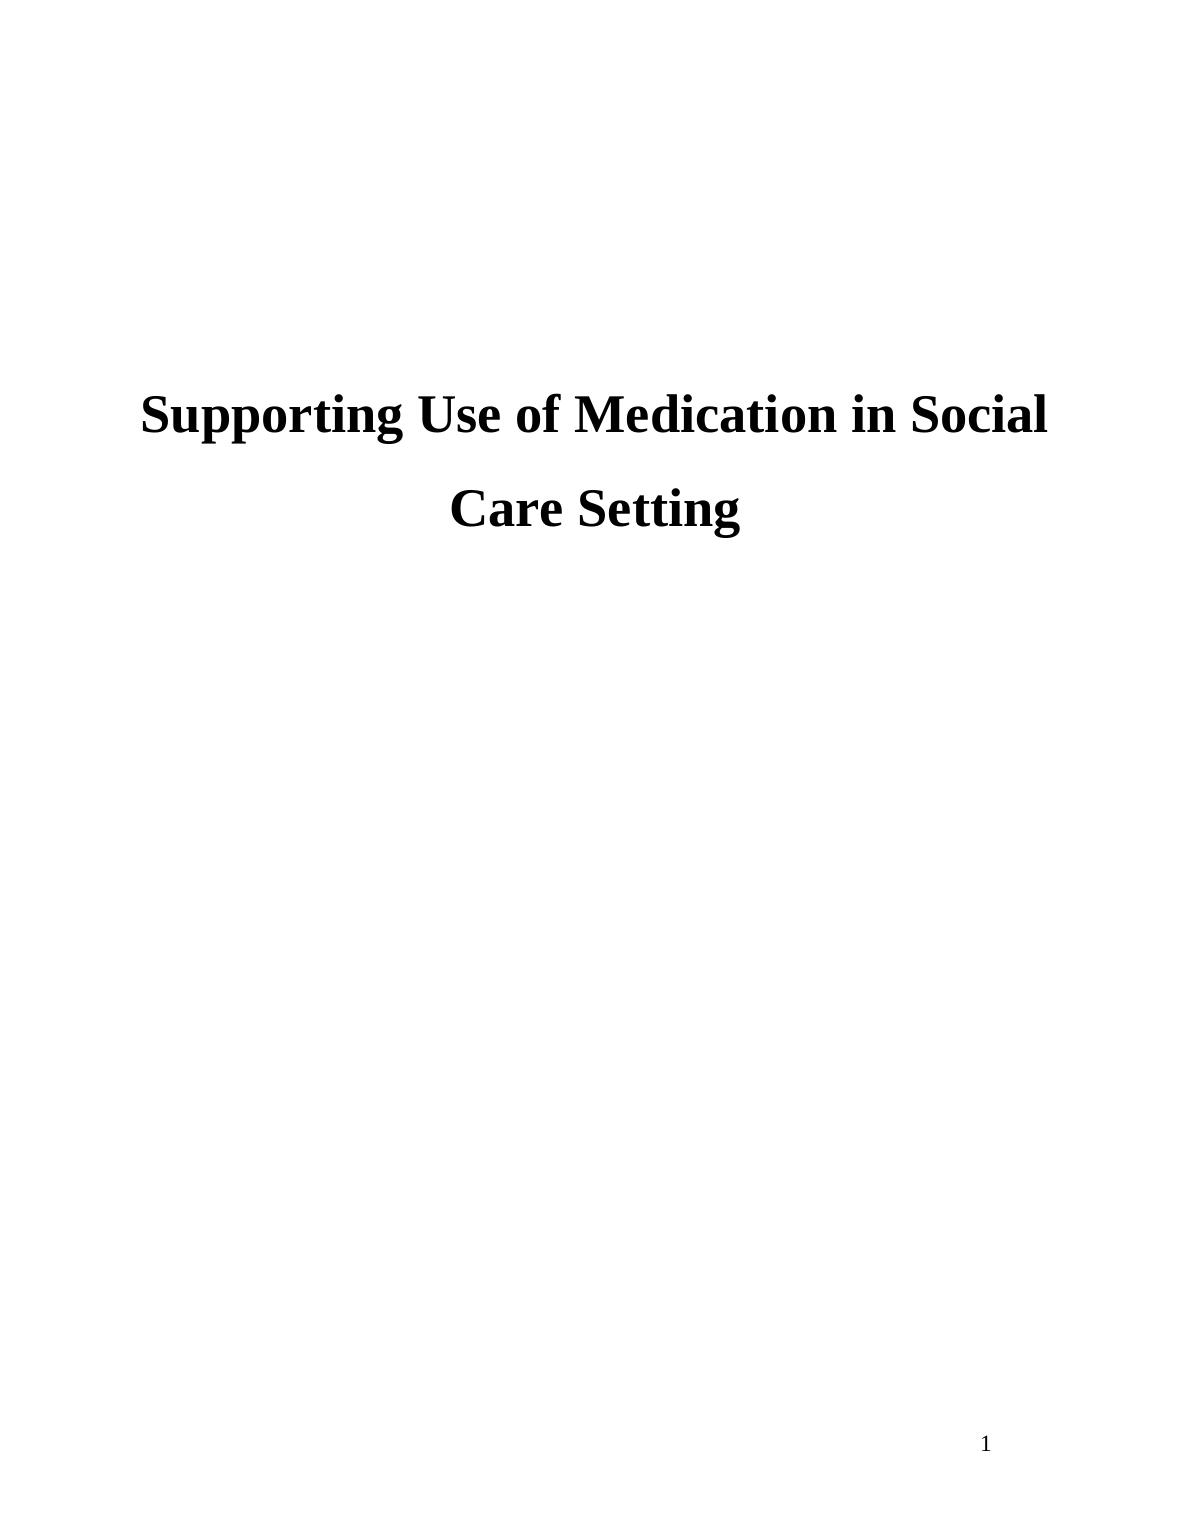 Report on Supporting Use of Medication in Social Care Setting_1